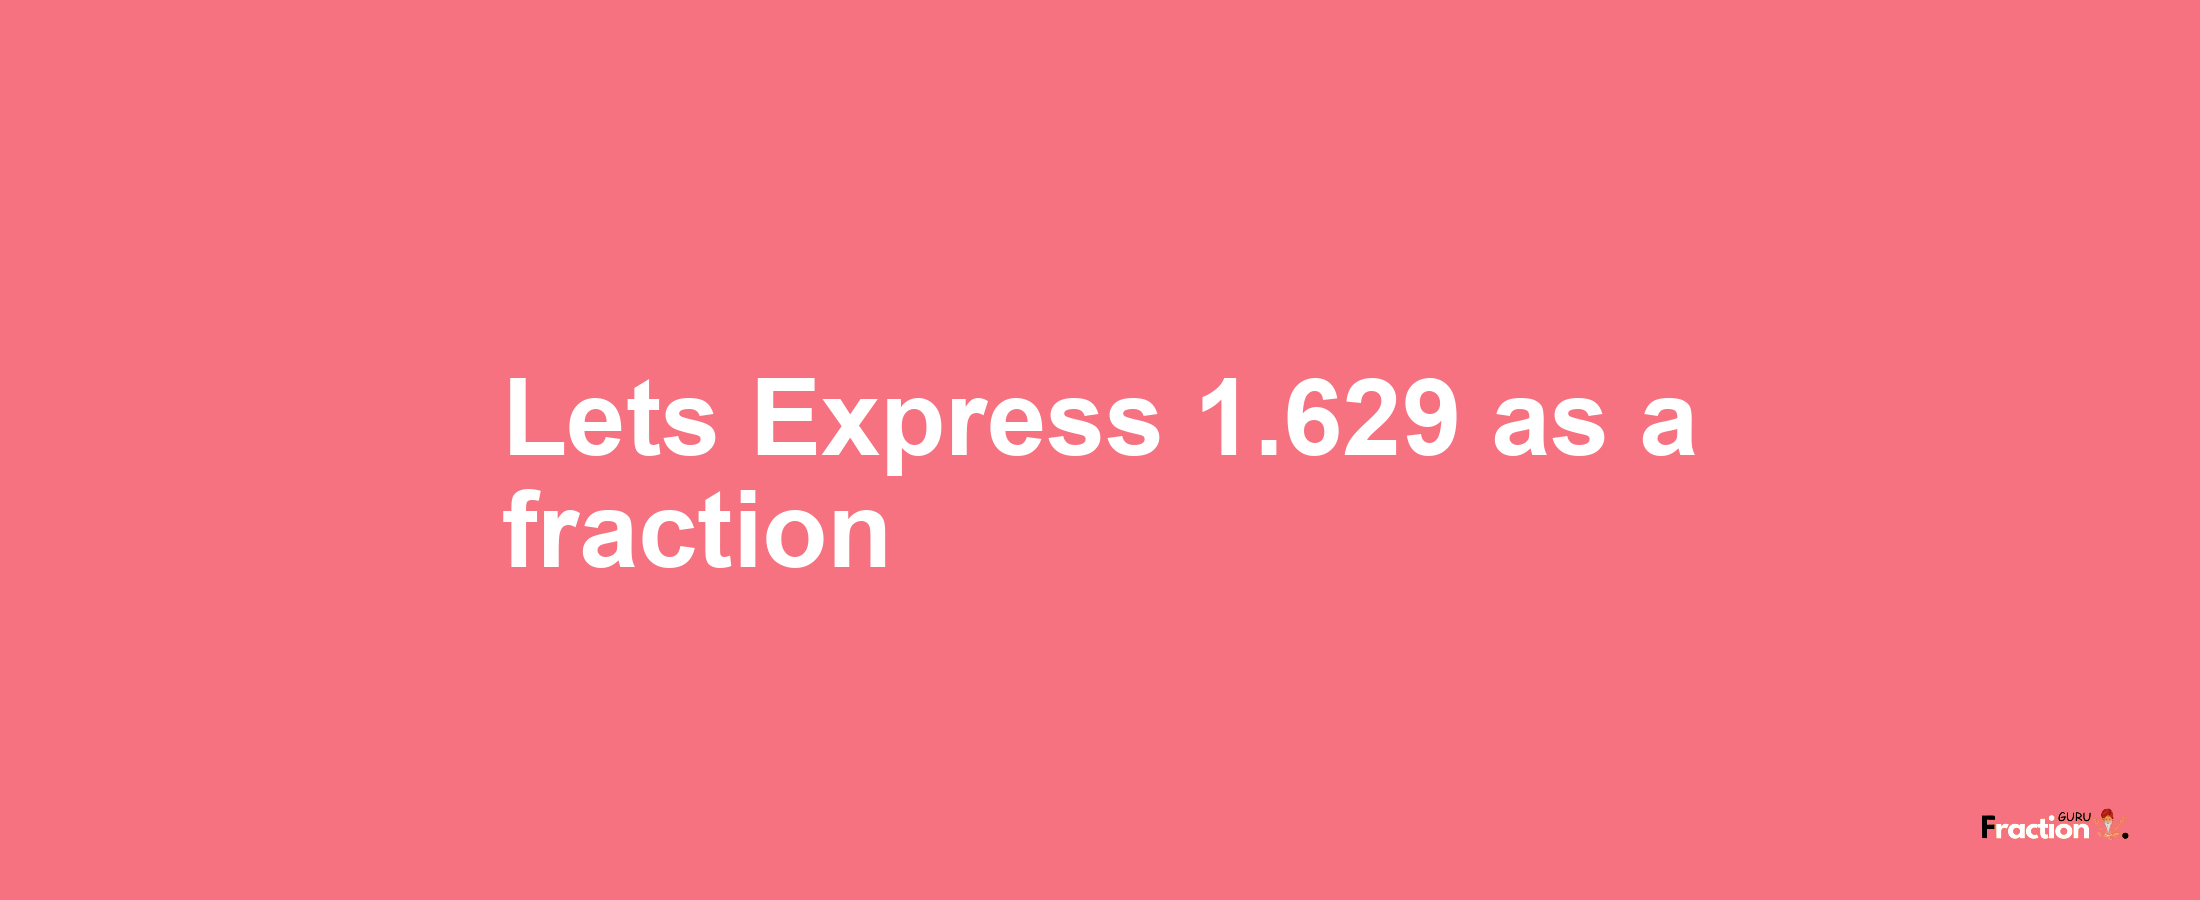 Lets Express 1.629 as afraction